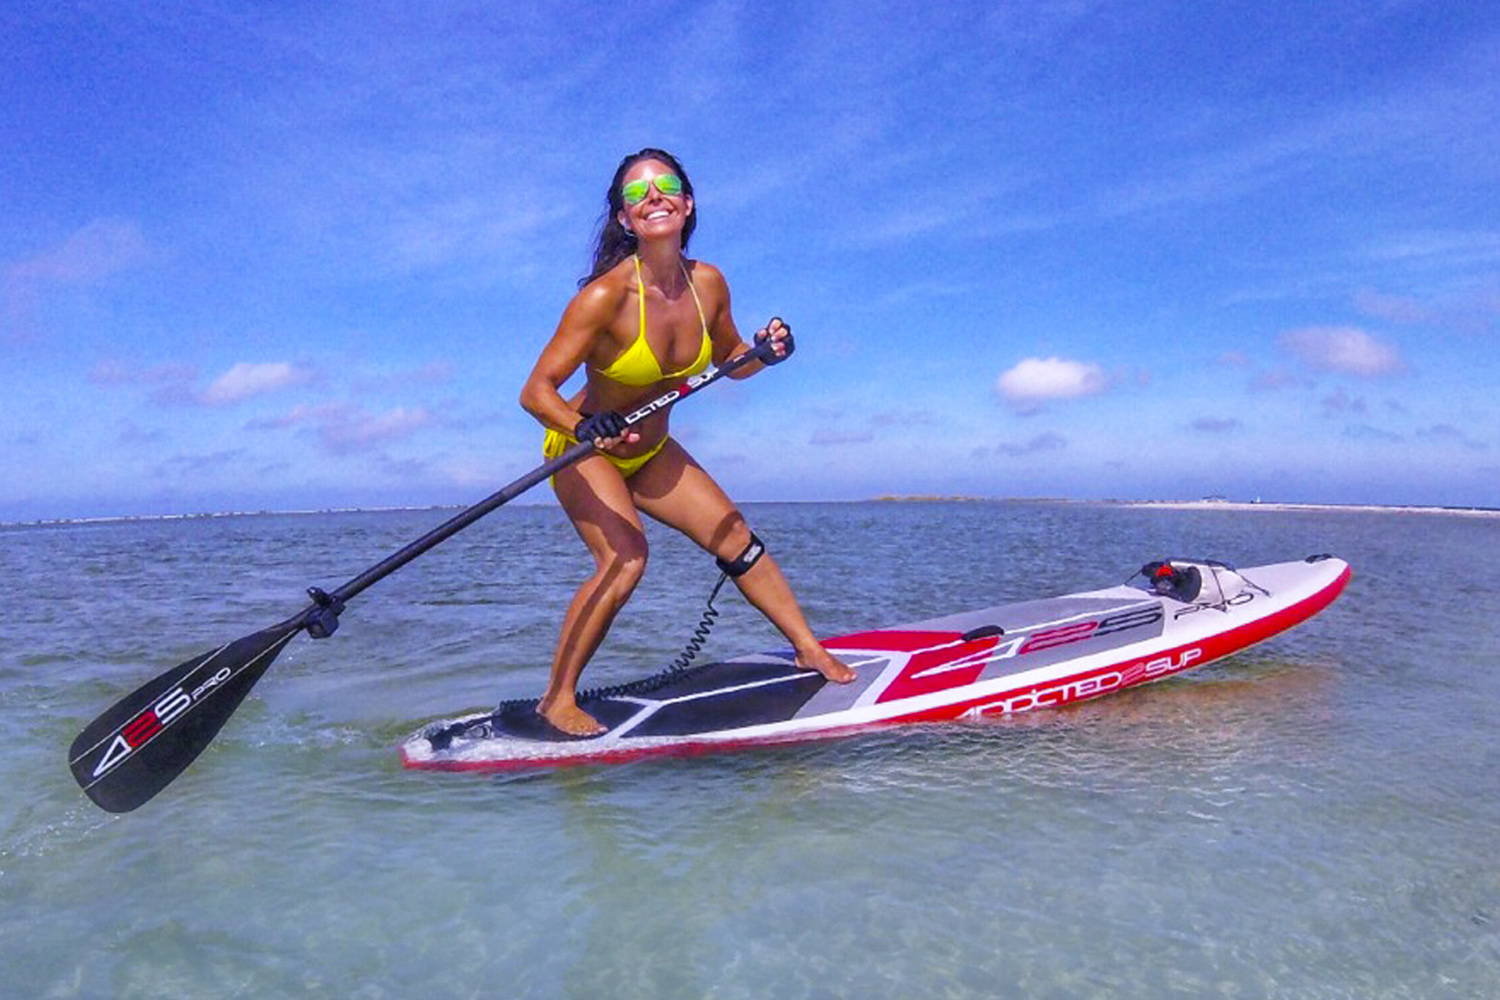 425 pro Air Sup Board: A woman on the board in the sea